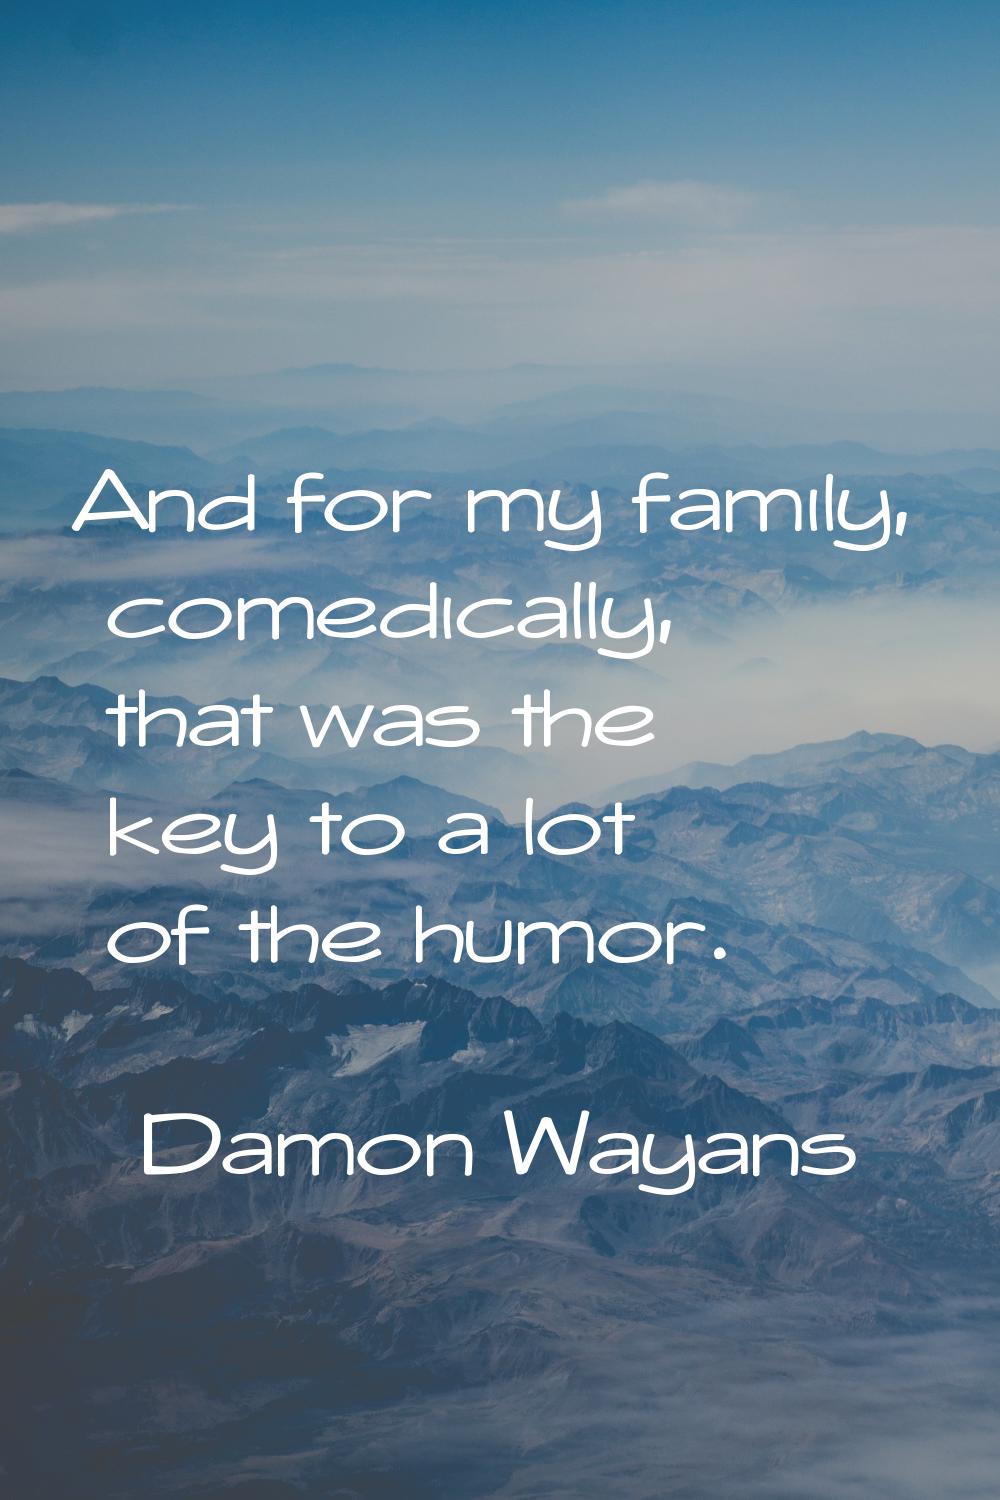 And for my family, comedically, that was the key to a lot of the humor.